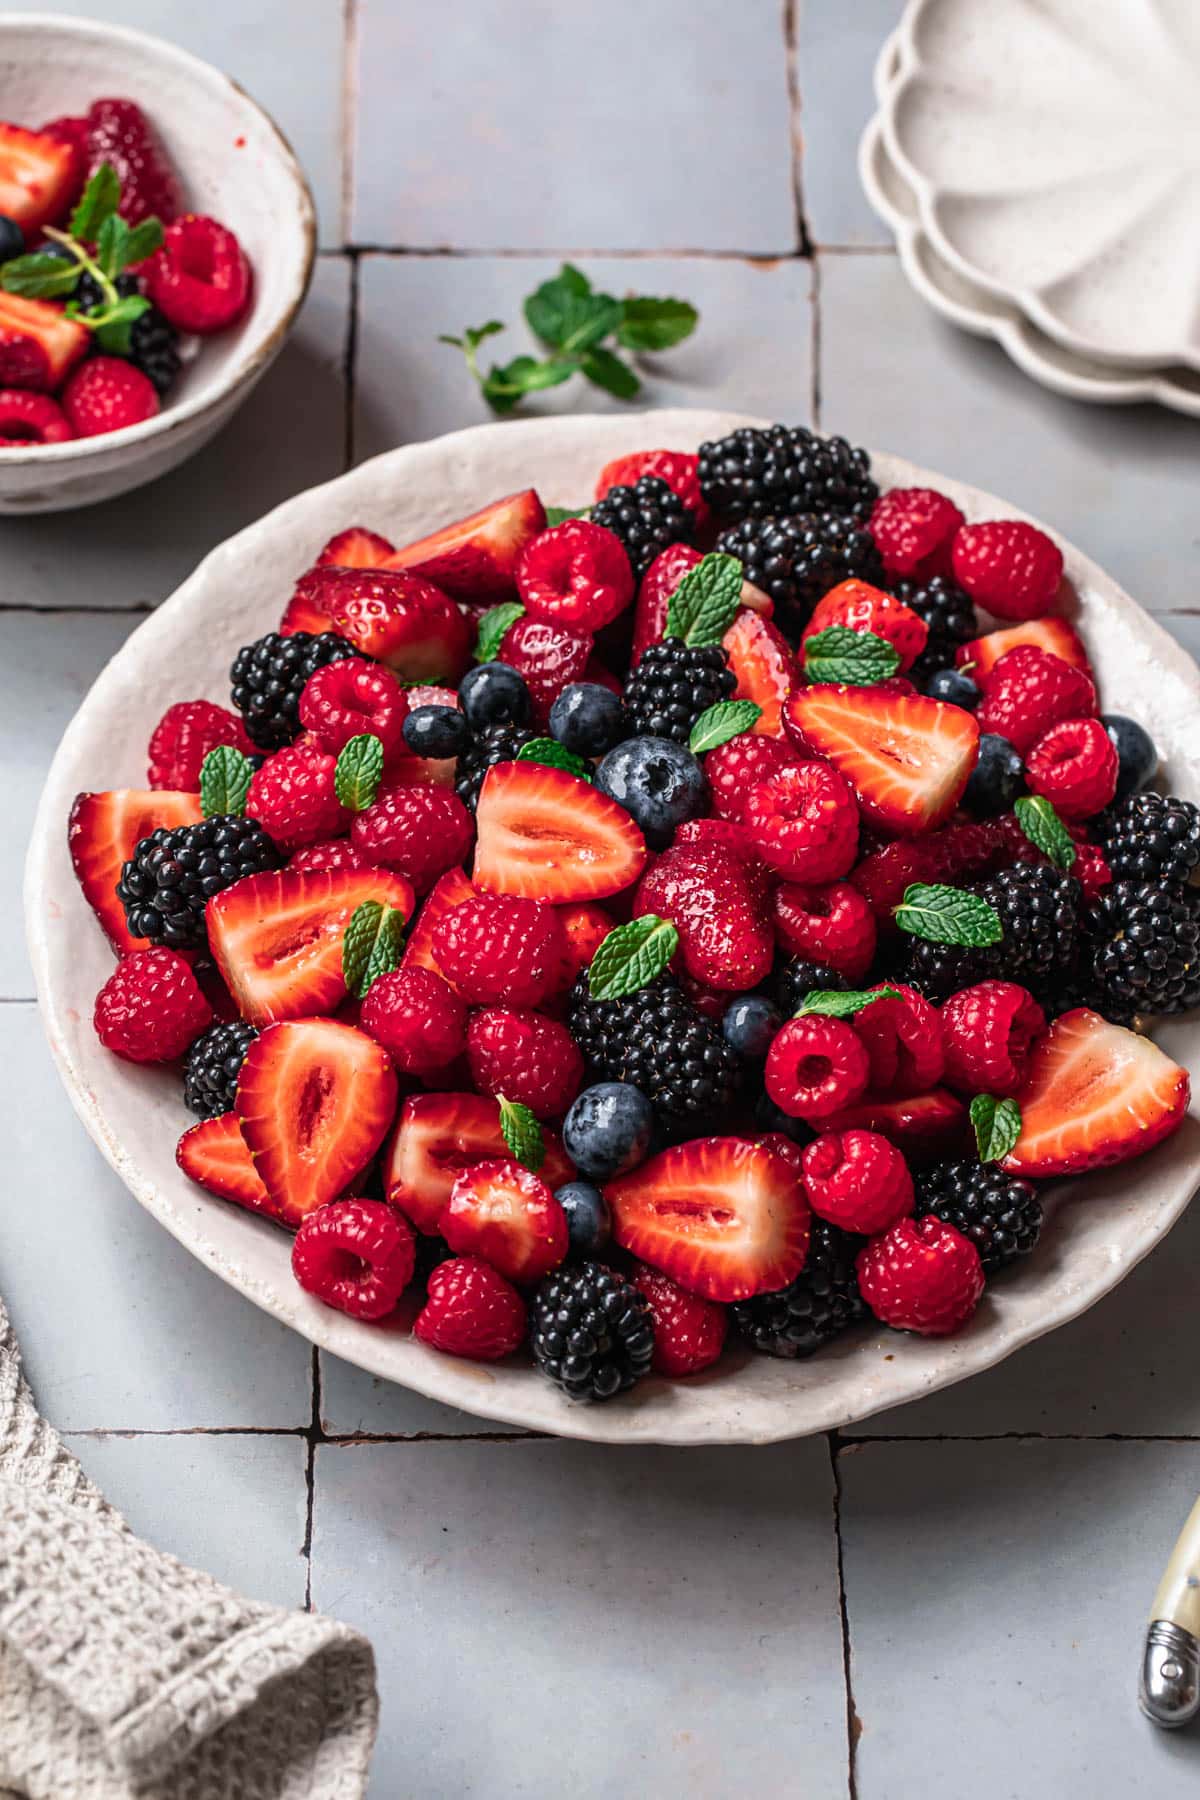 Strawberry and blueberry salad in a white serving bowl, topped with mint leaves.